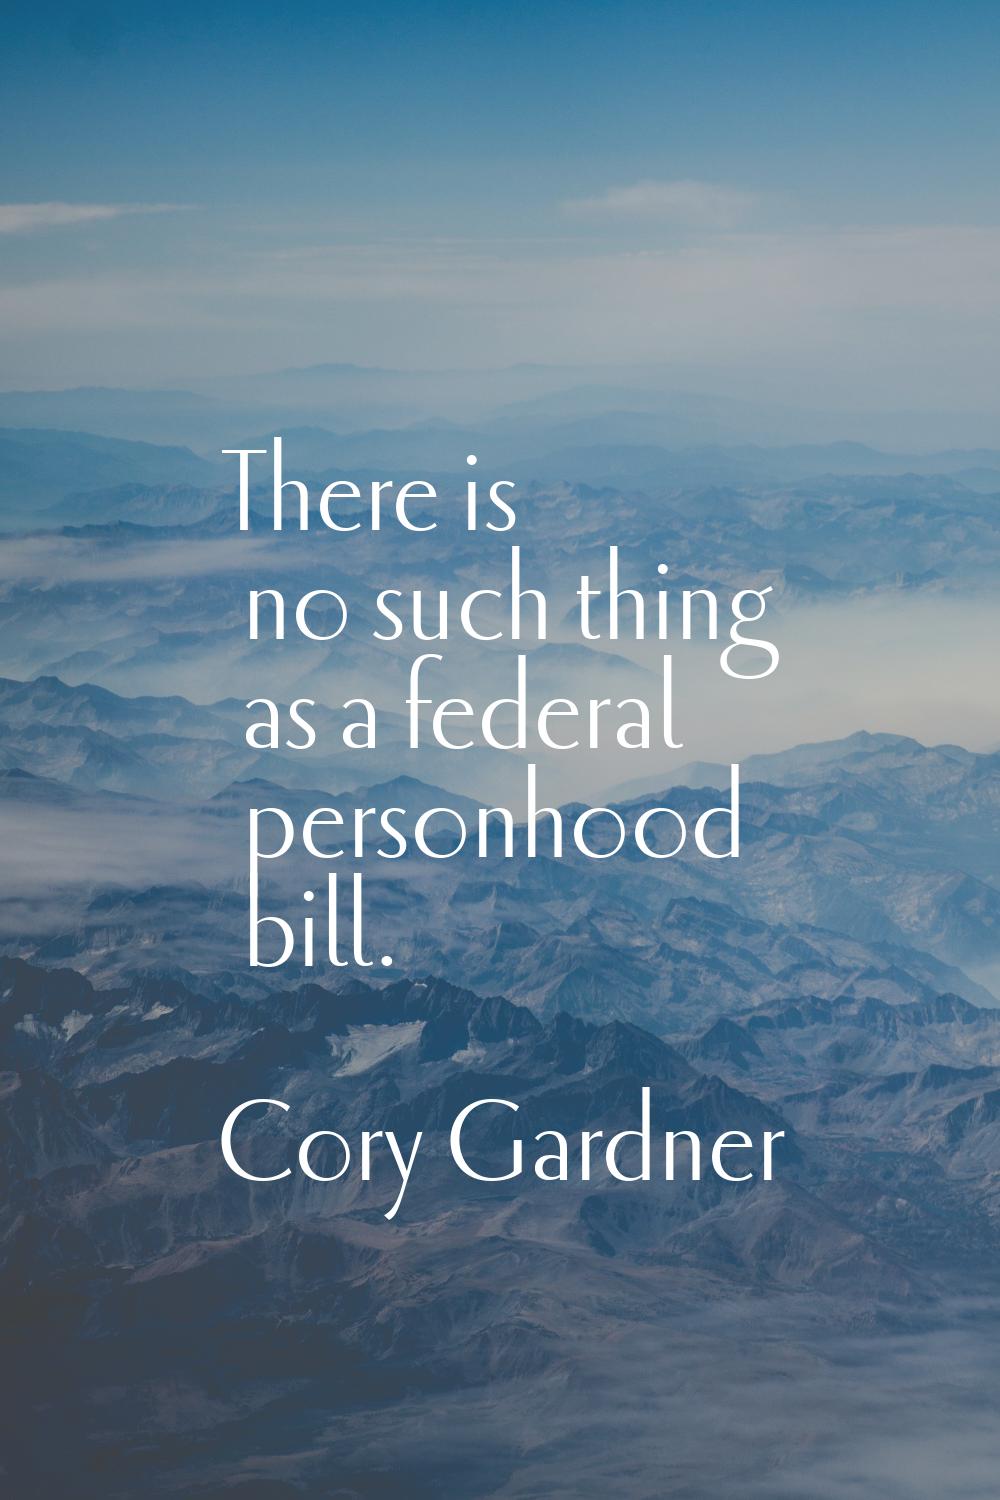 There is no such thing as a federal personhood bill.